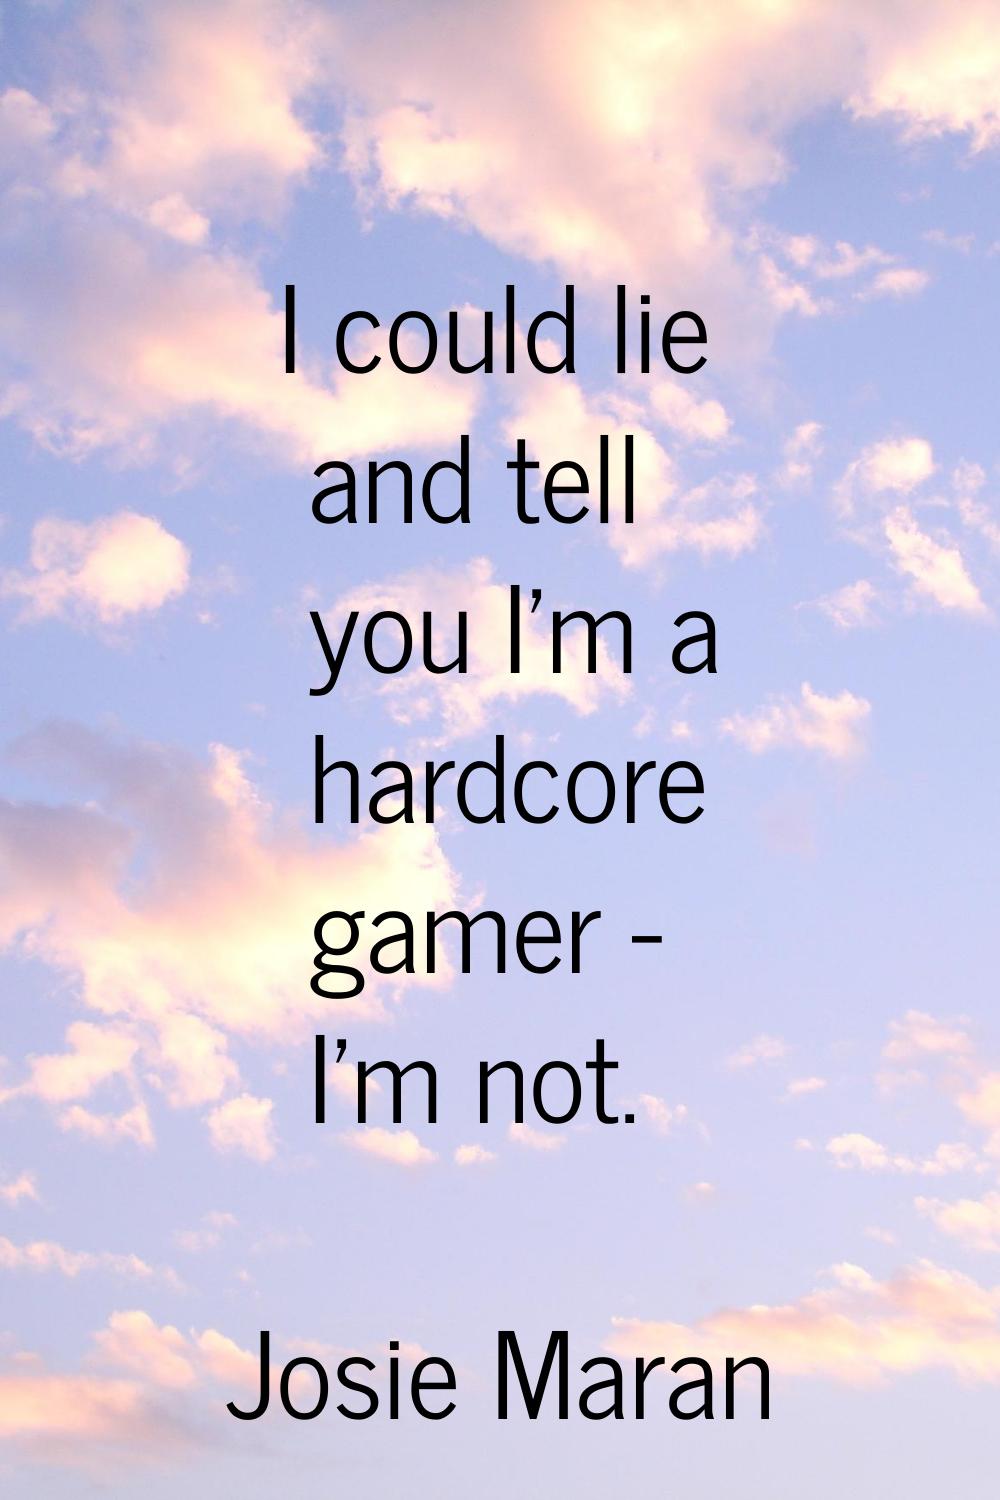 I could lie and tell you I'm a hardcore gamer - I'm not.